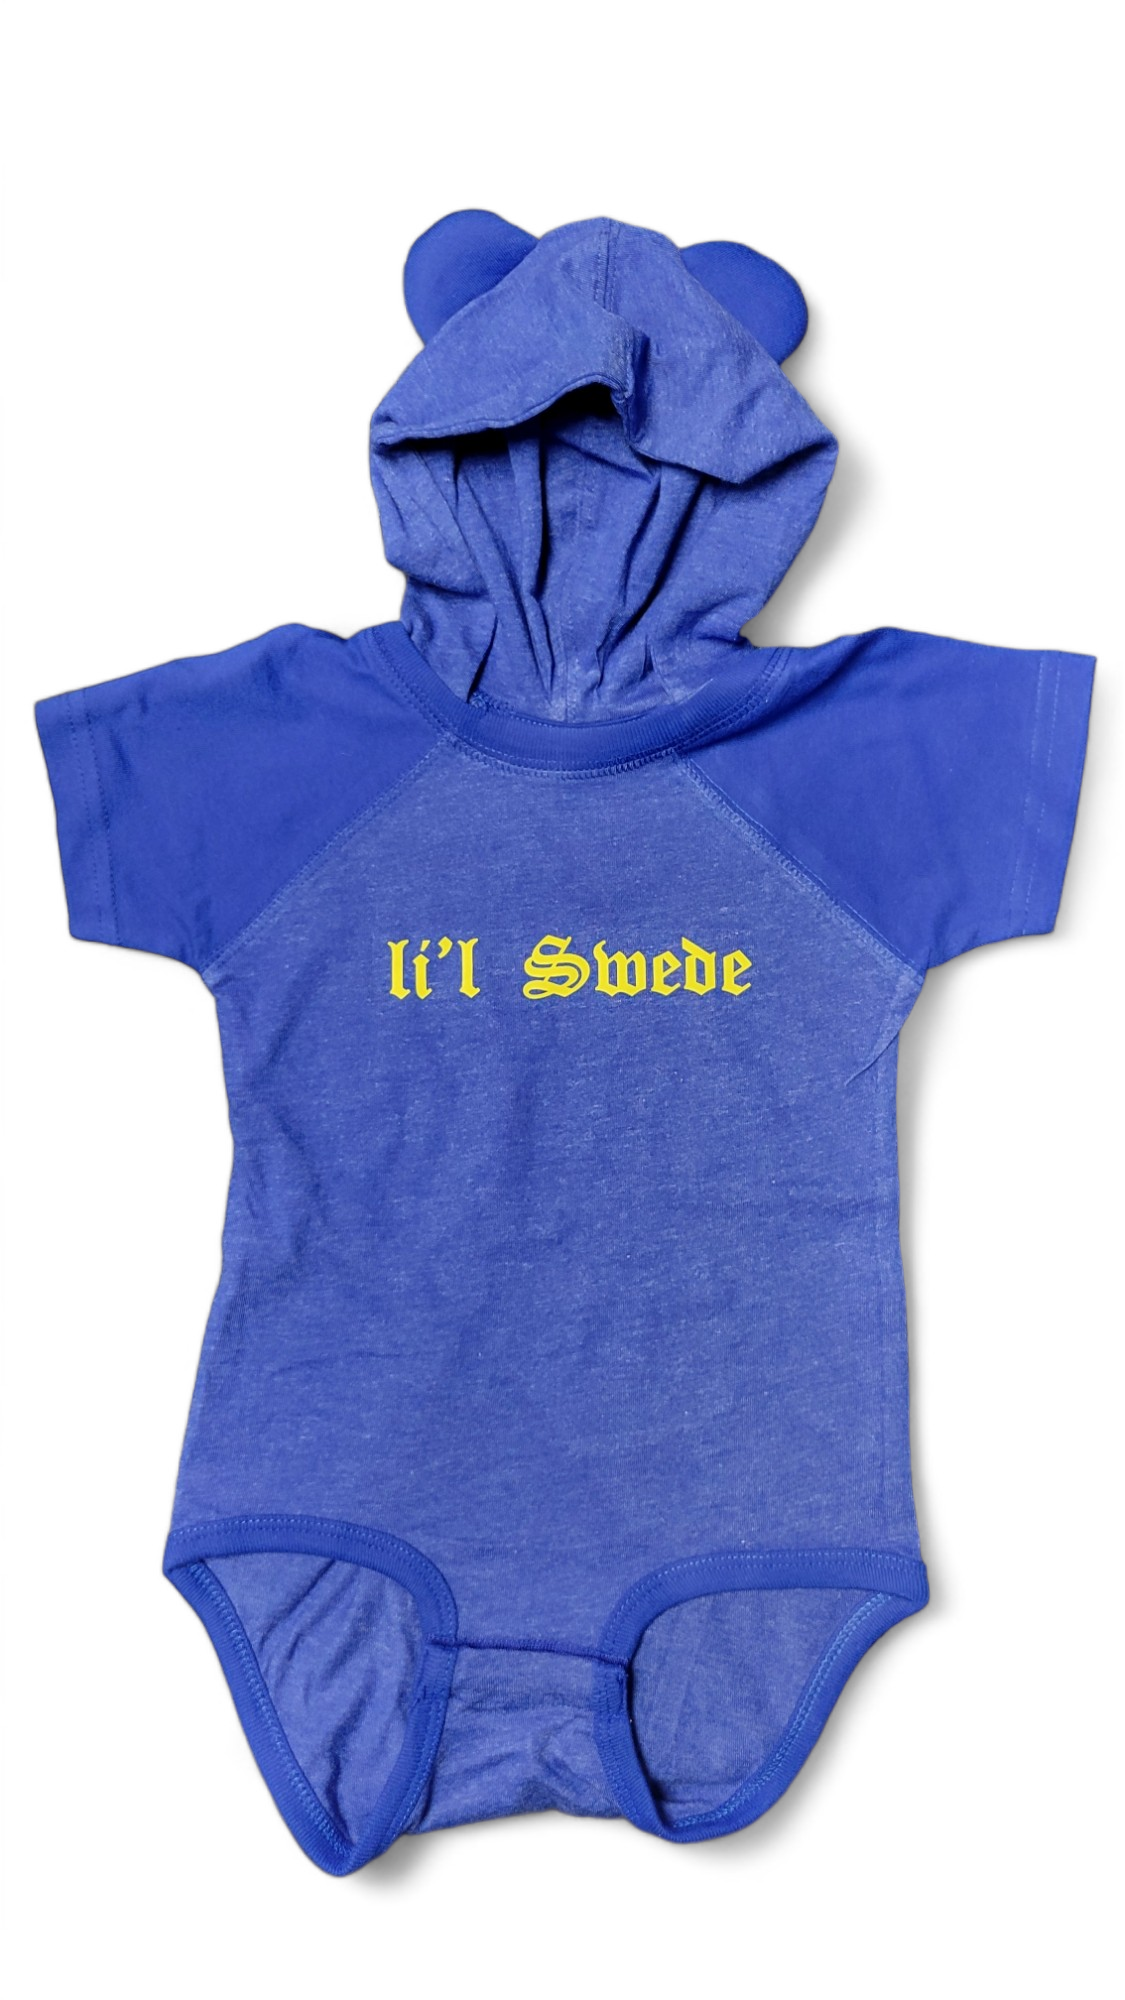 Onesie: Lil Swede with Hood (12mo or 18mo)